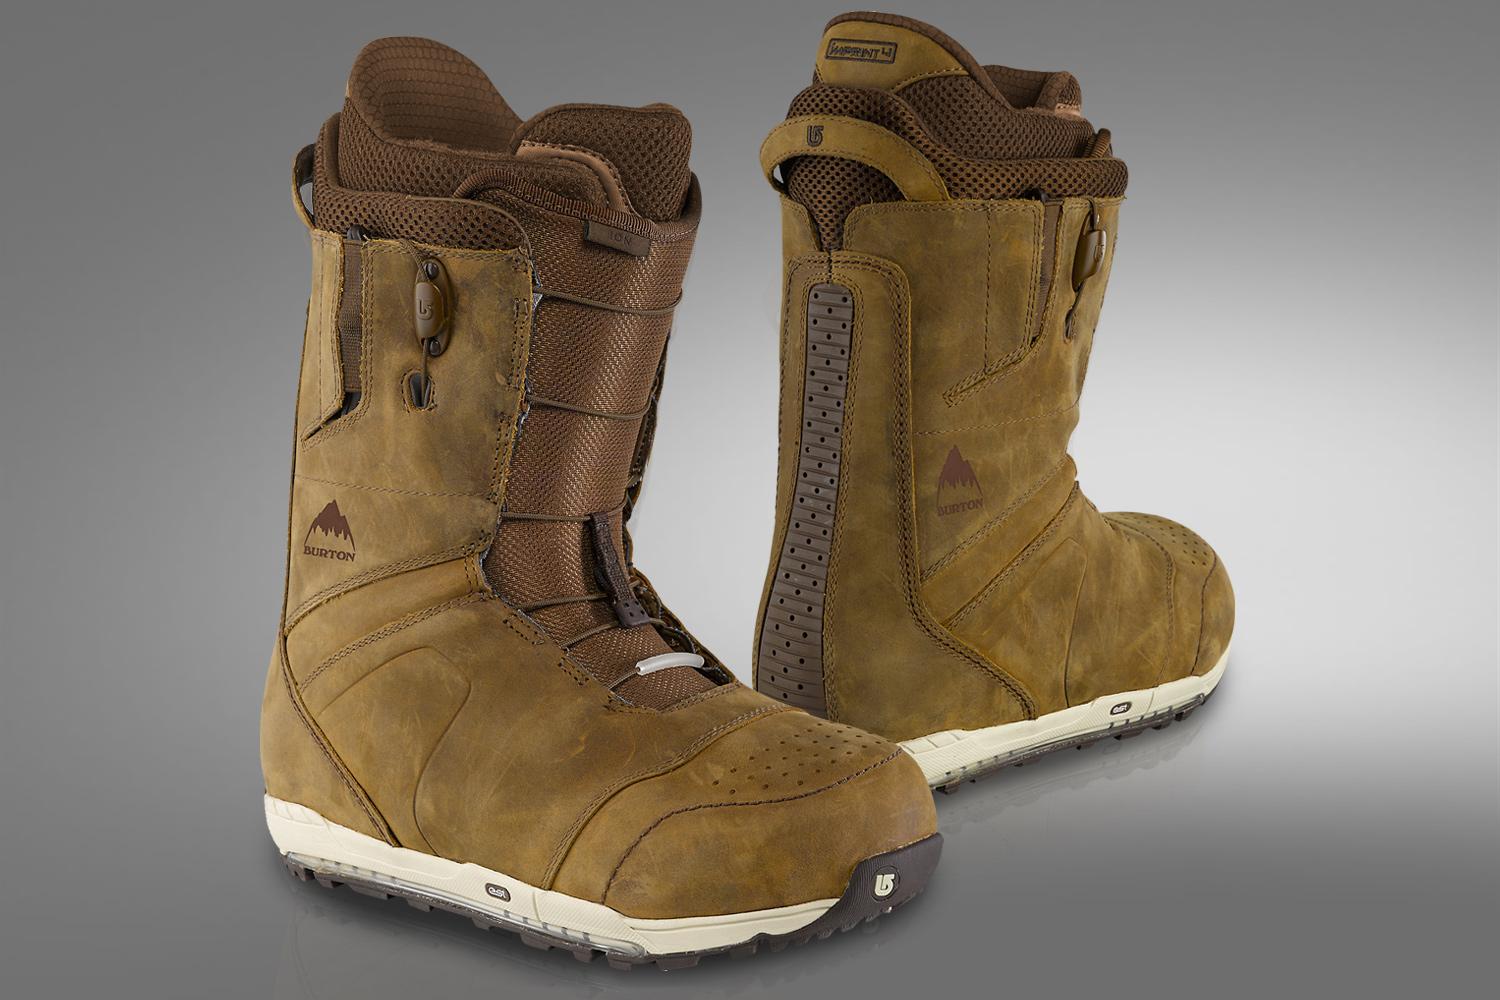 Burton's Ion Leather boots combine performance with style | Digital